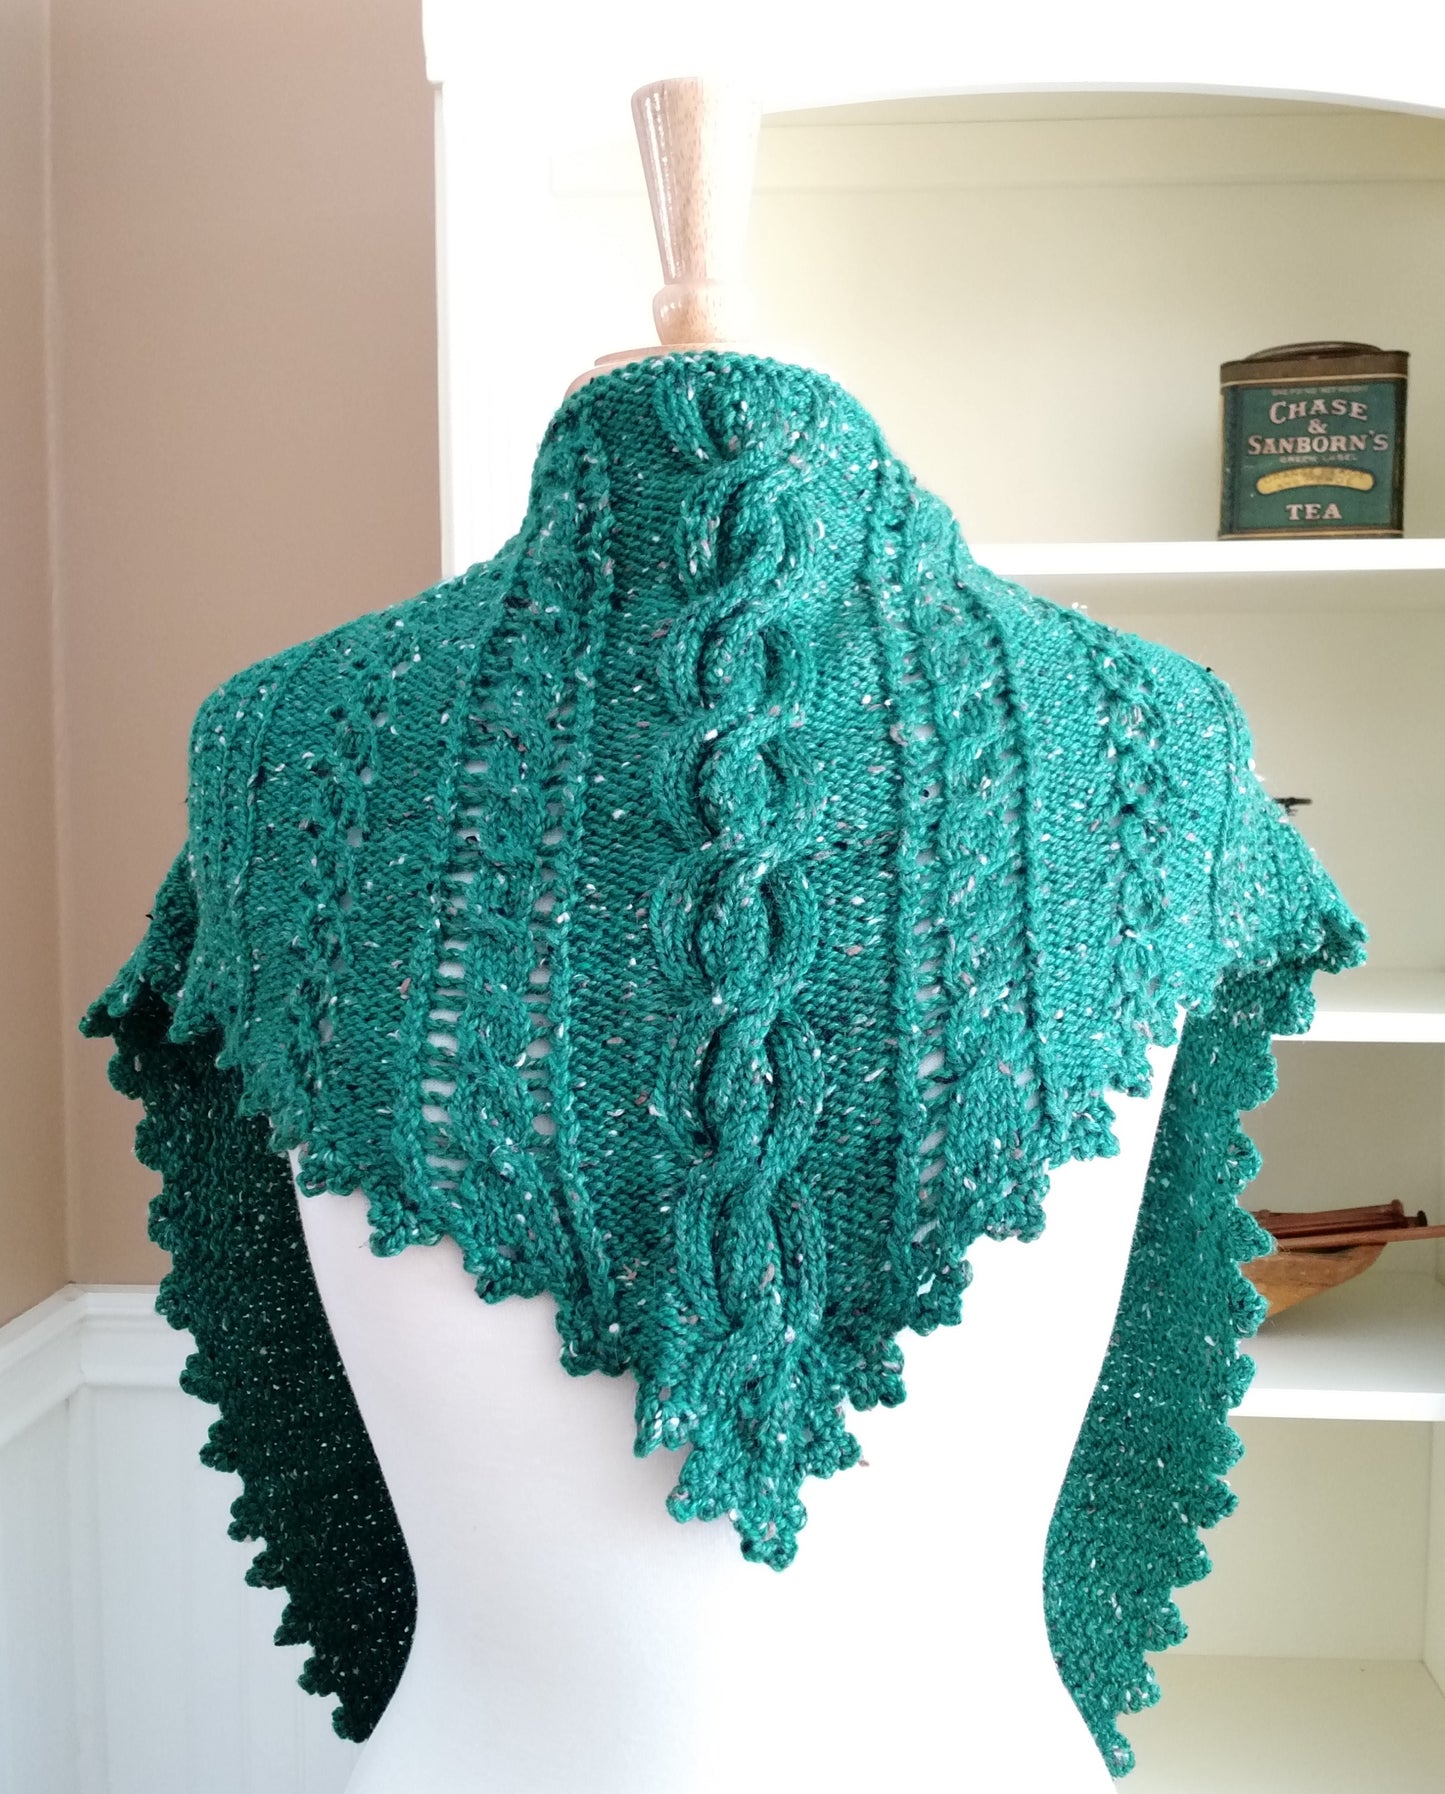 Clover Lace Cable Shawlette Knitting Pattern